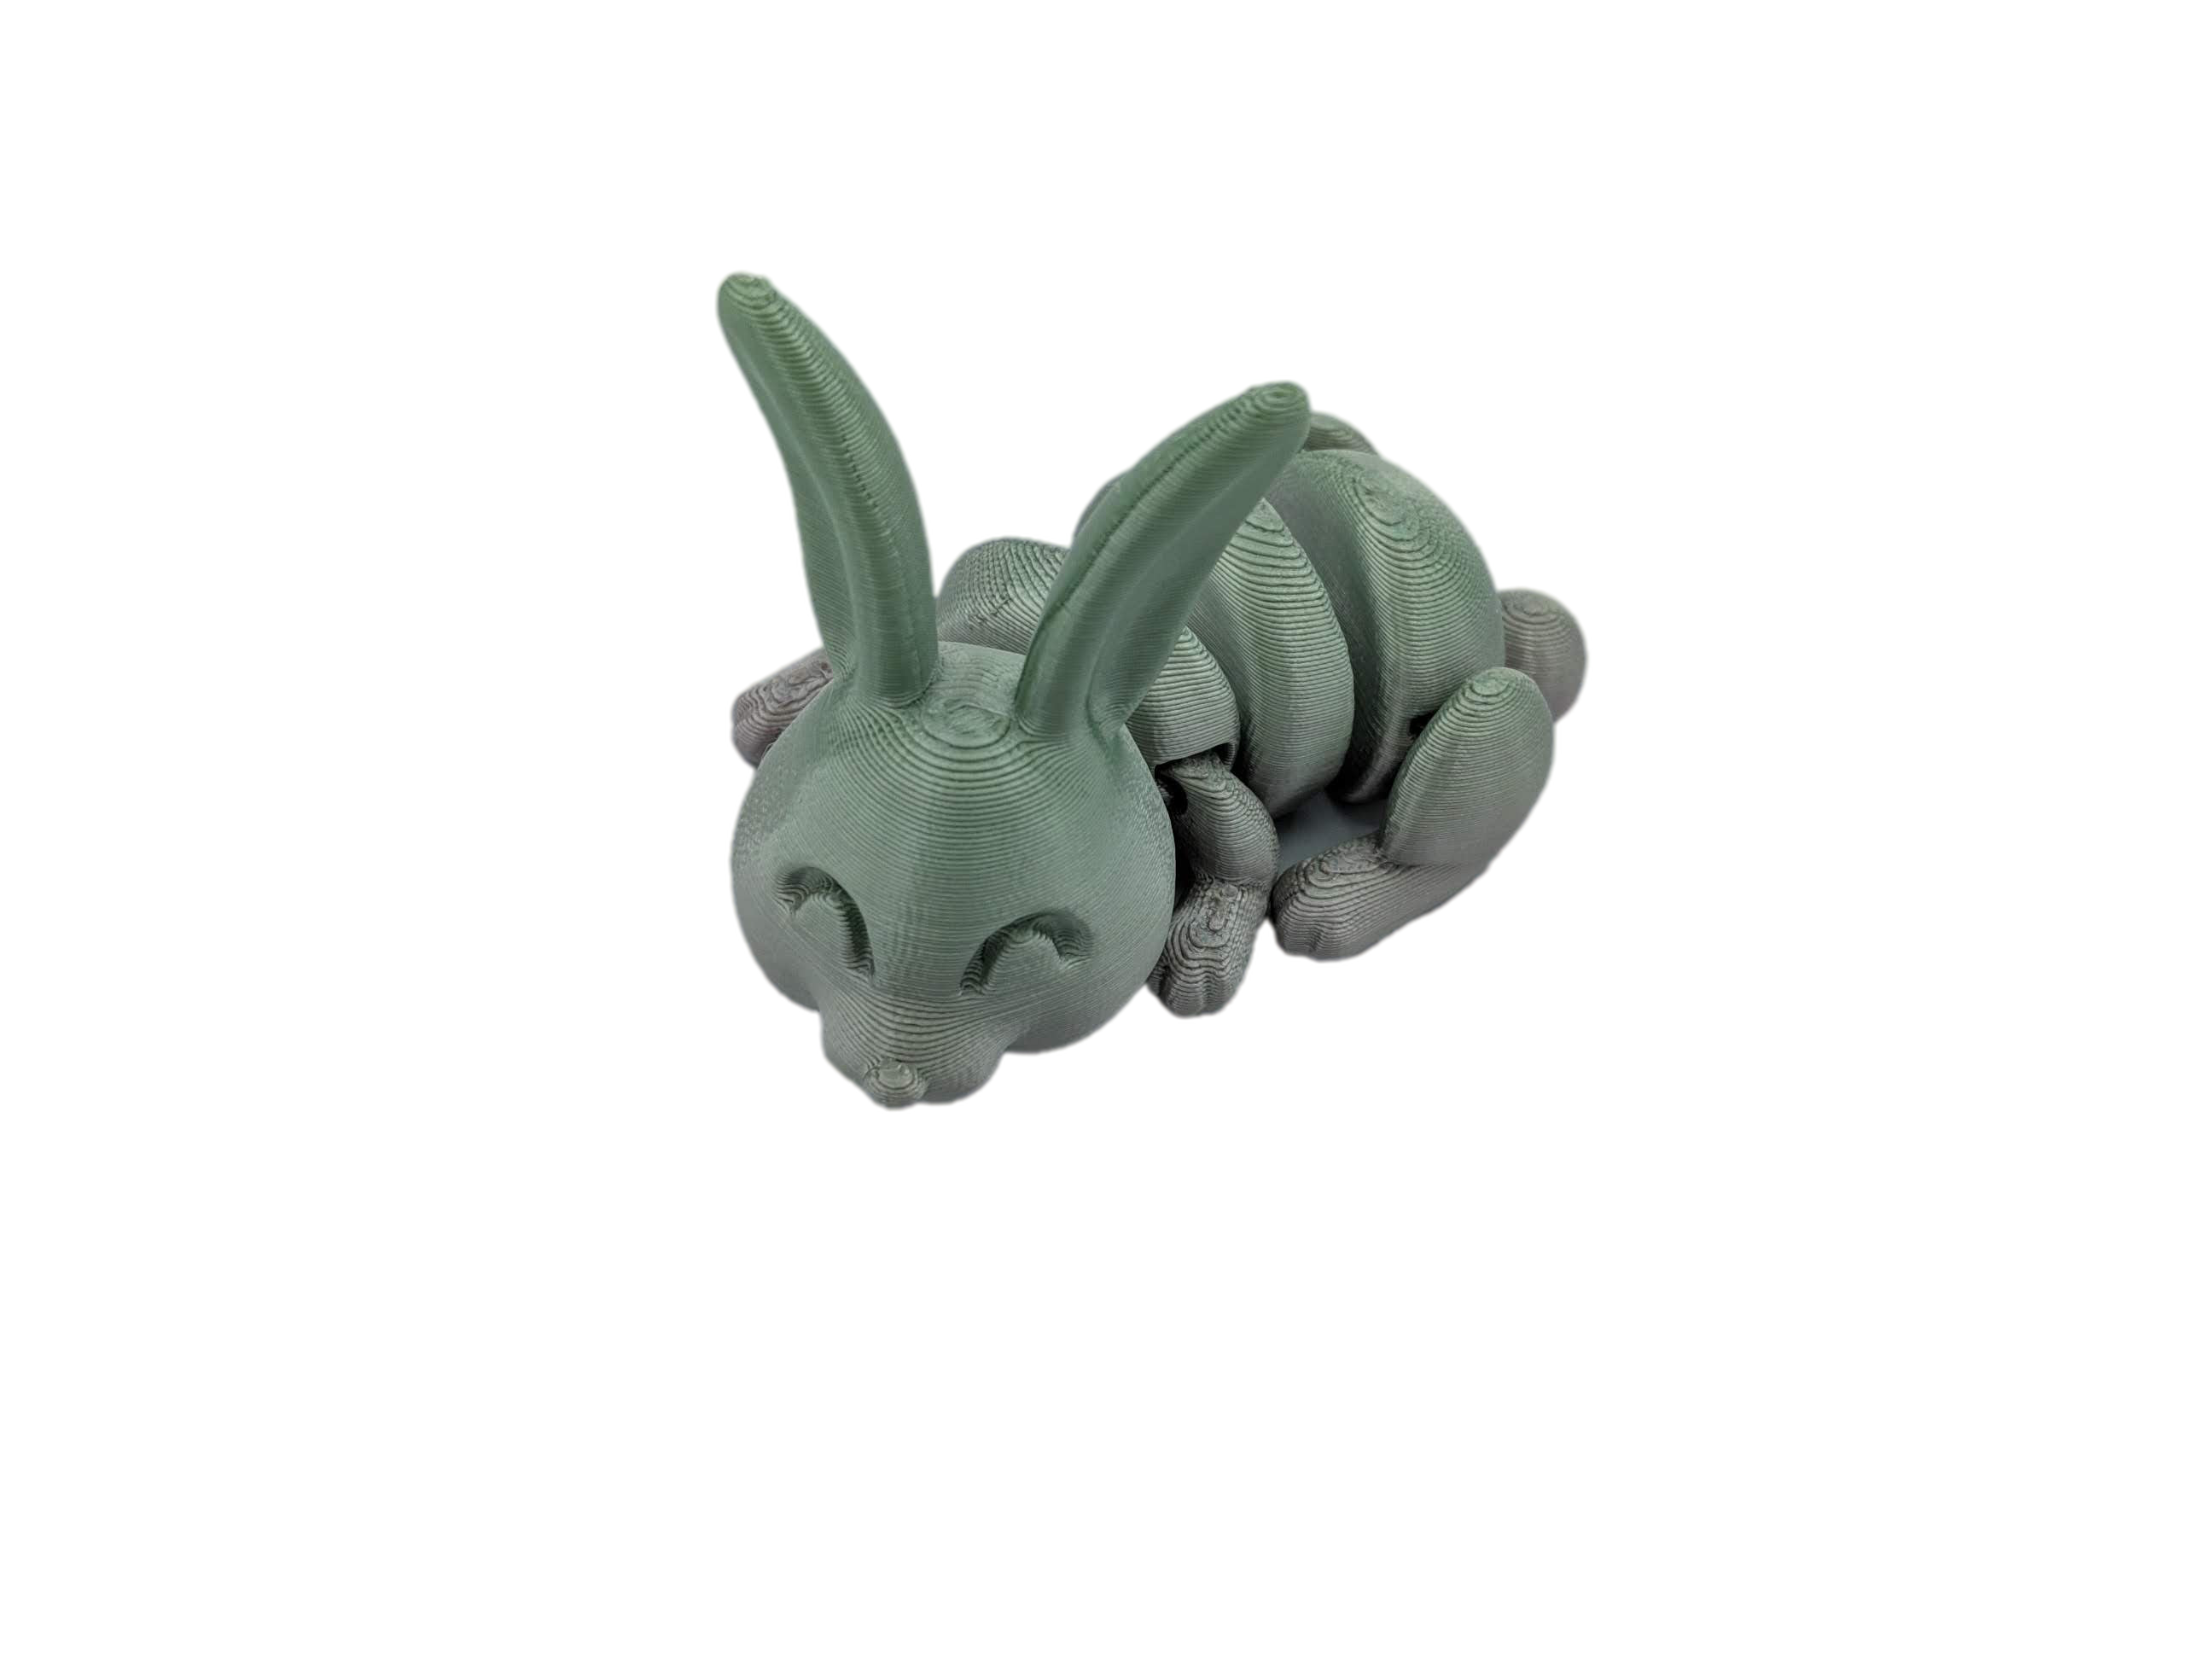 Articulated Bunny